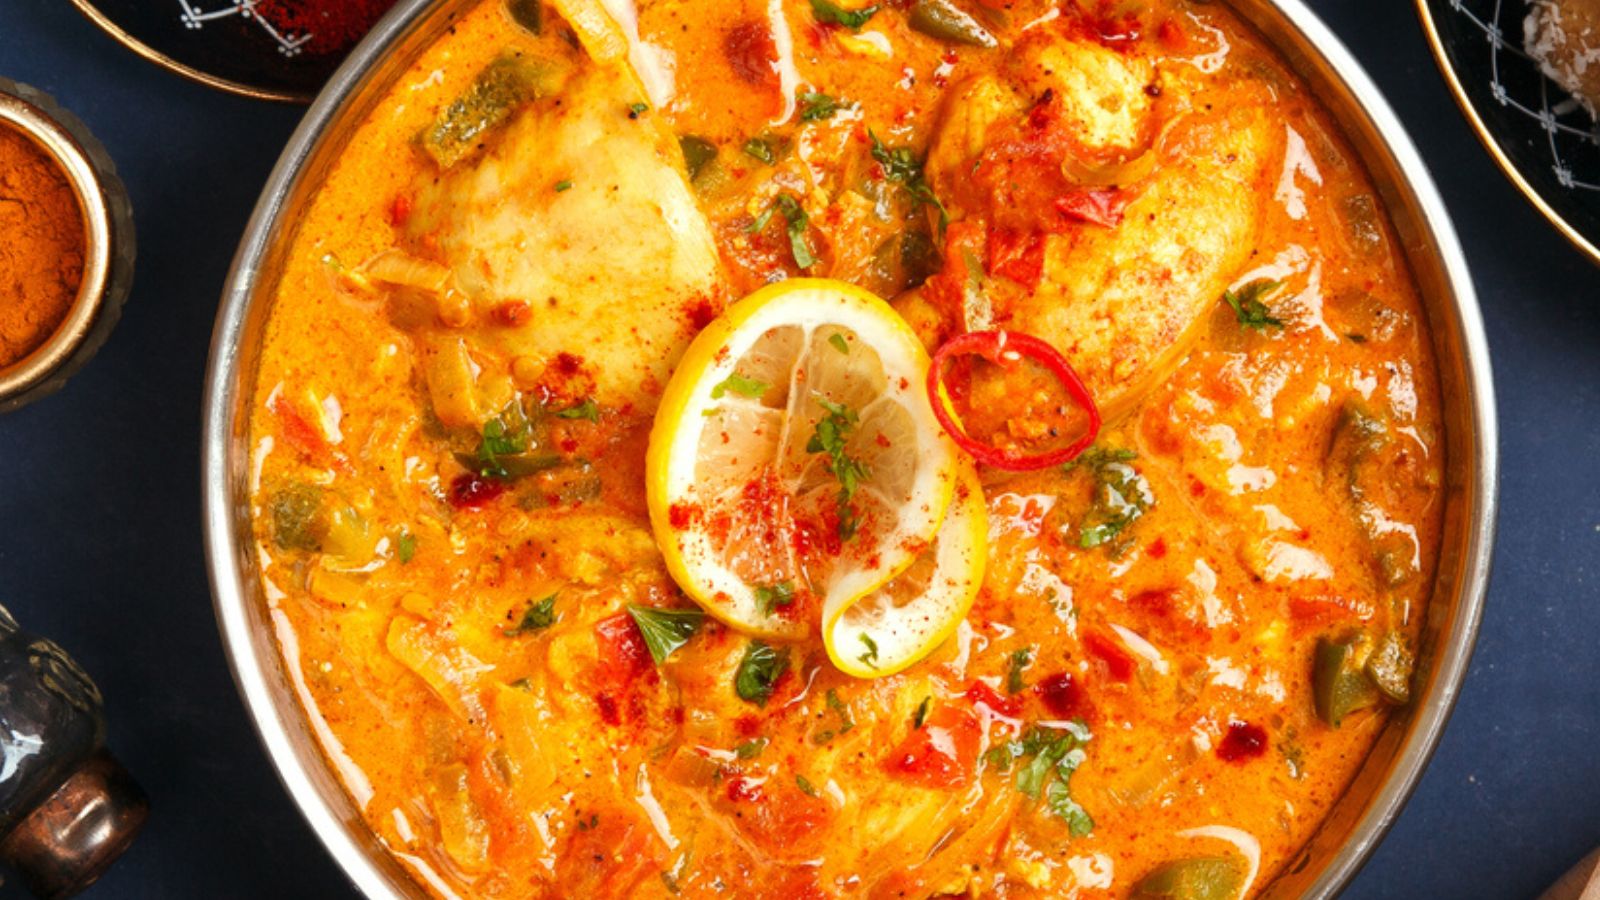 22 Easy One-Pot Meals You’ll Want to Make Again and Again